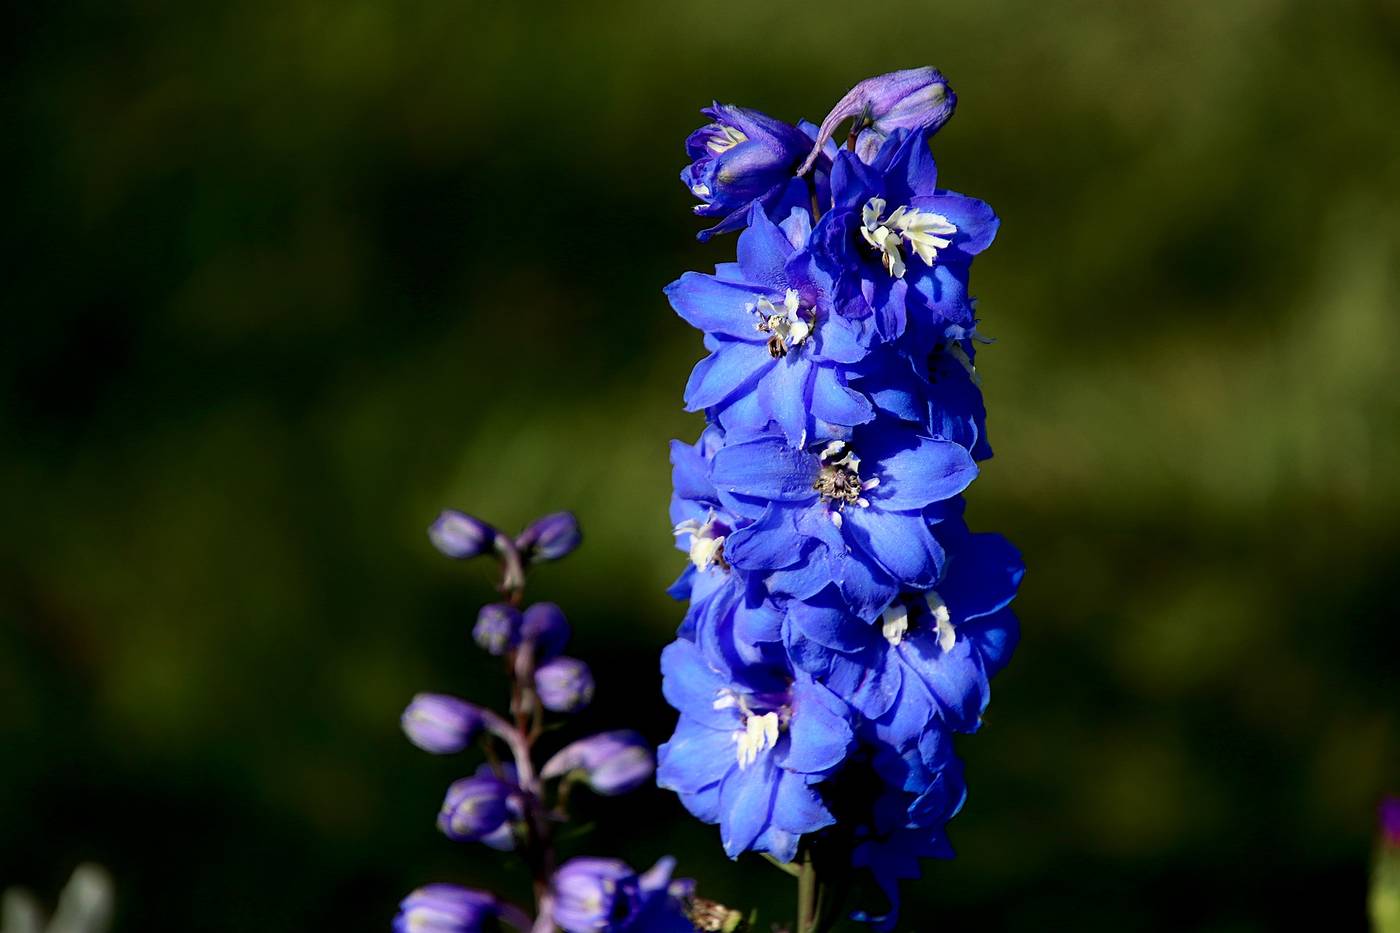 Delphiniums: The flower symbolizing an open heart and generosity